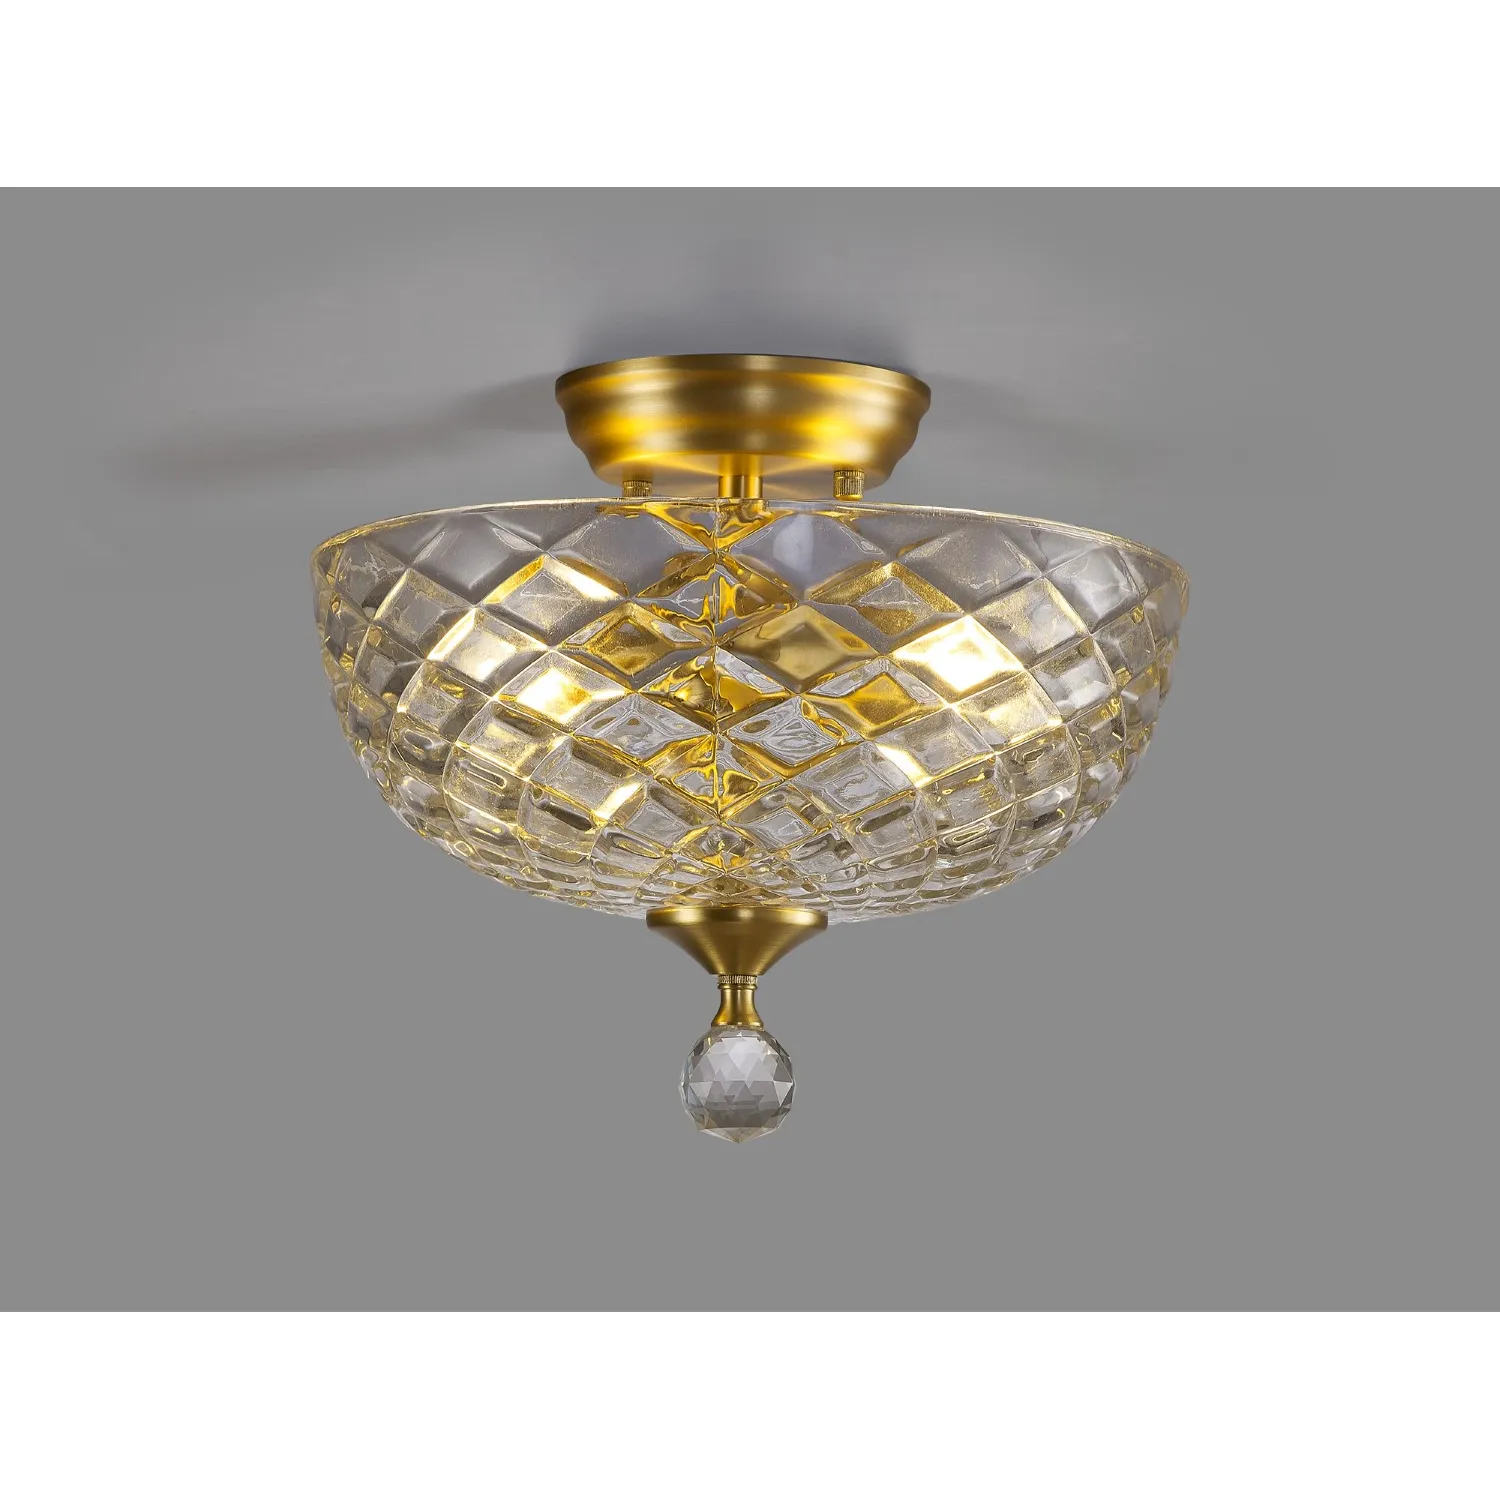 Billericay 2 Light Semi Flush Ceiling E27 With Flat Round 30cm Patterned Glass Shade Satin Gold Clear